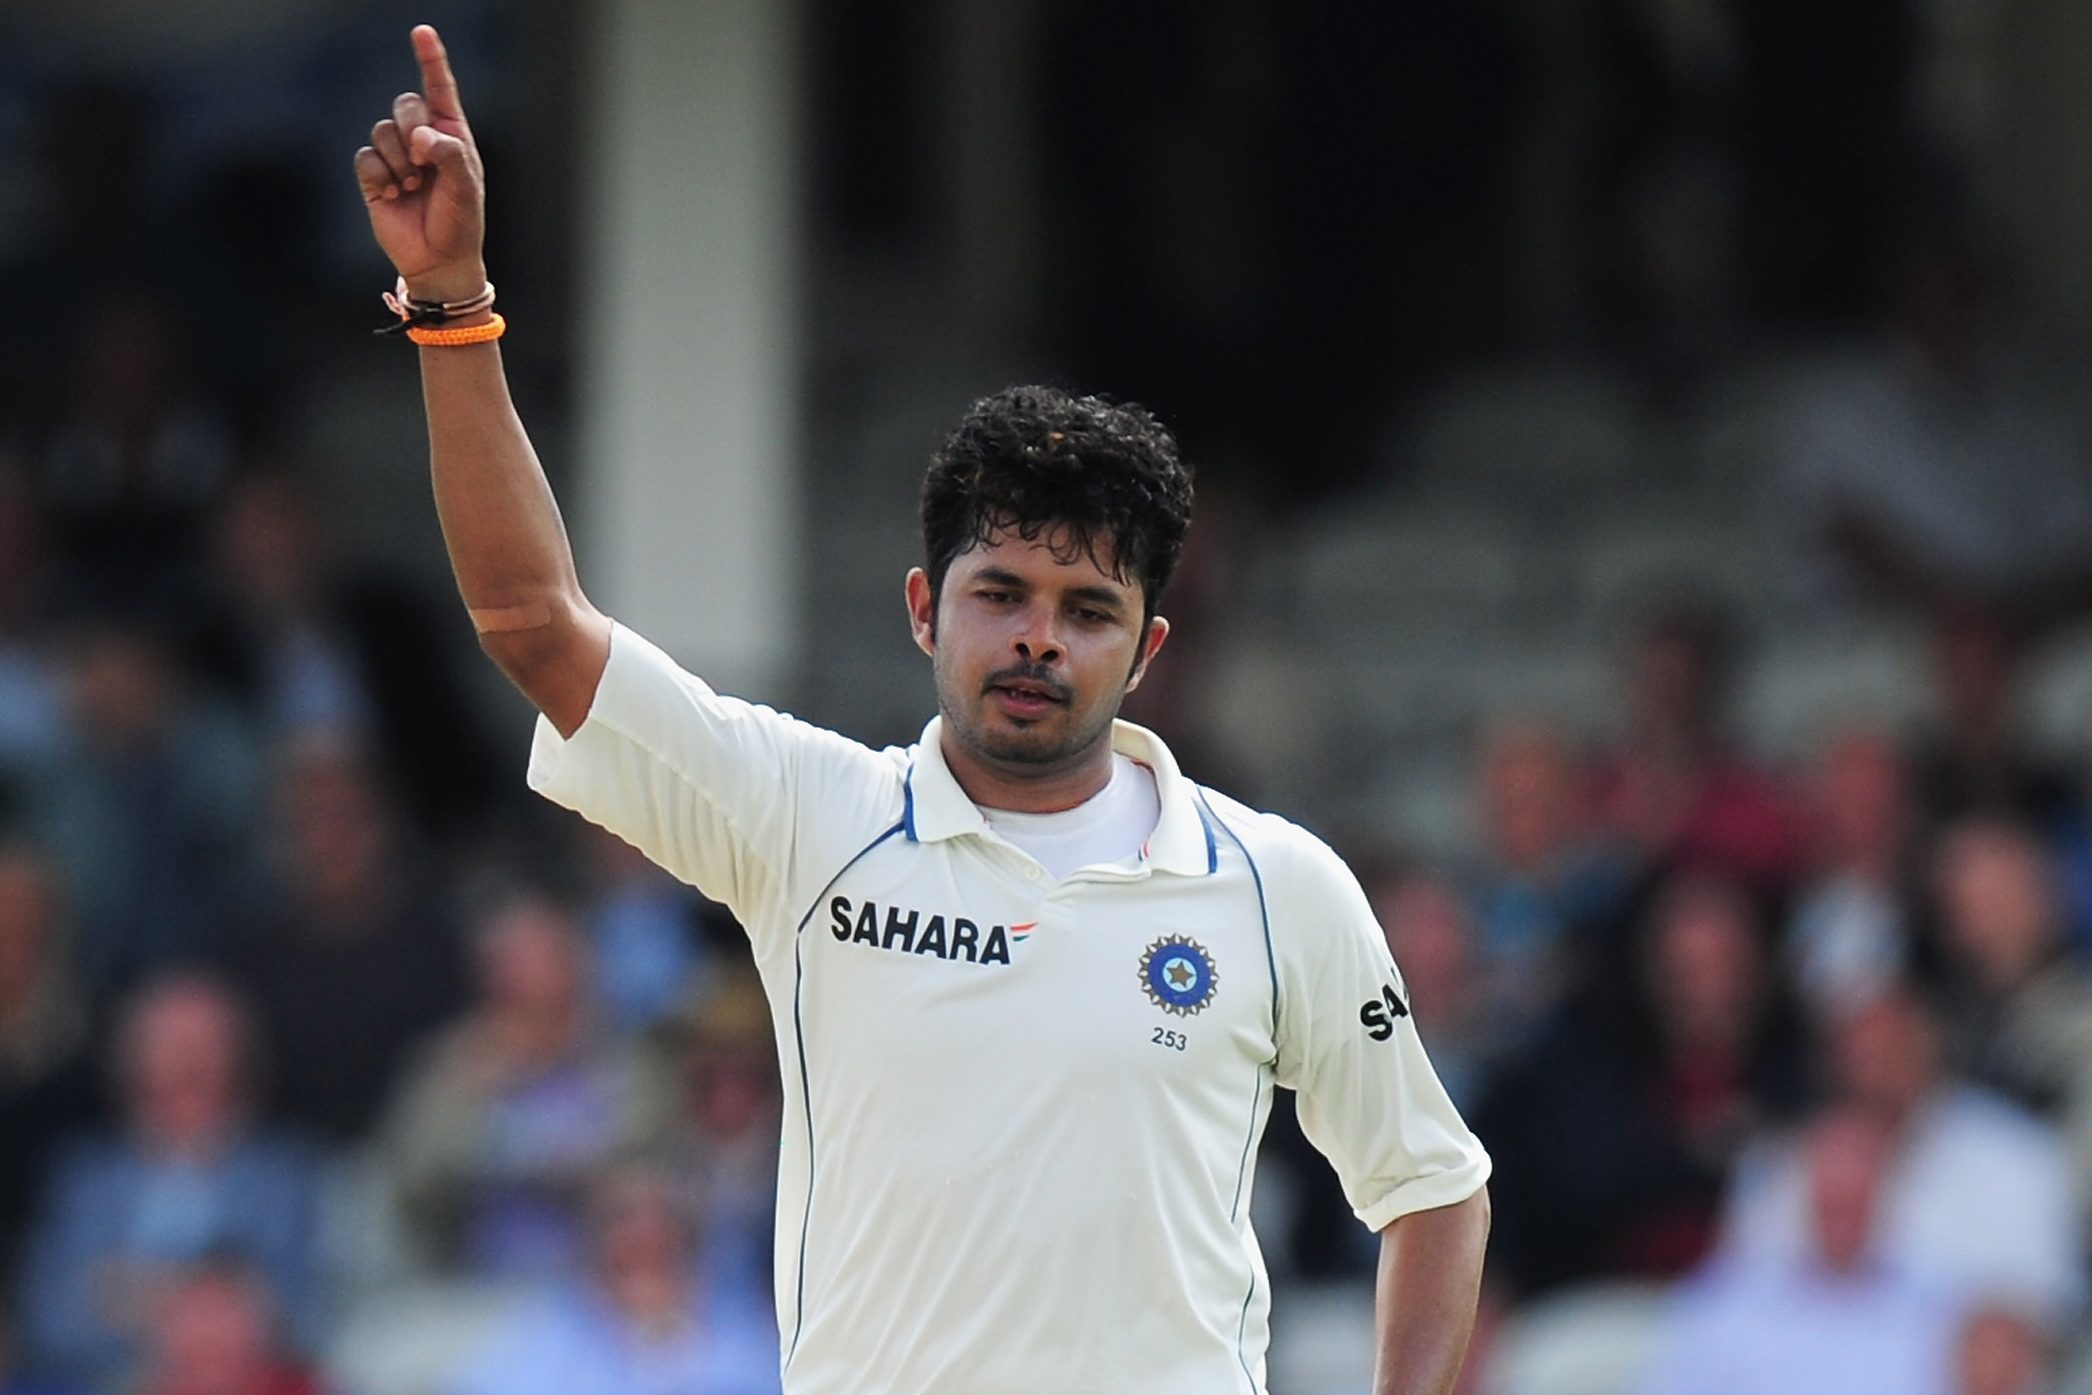 Sreesanth celebrates the wicket of Eoin Morgan of England a test match between England and India in 2011.